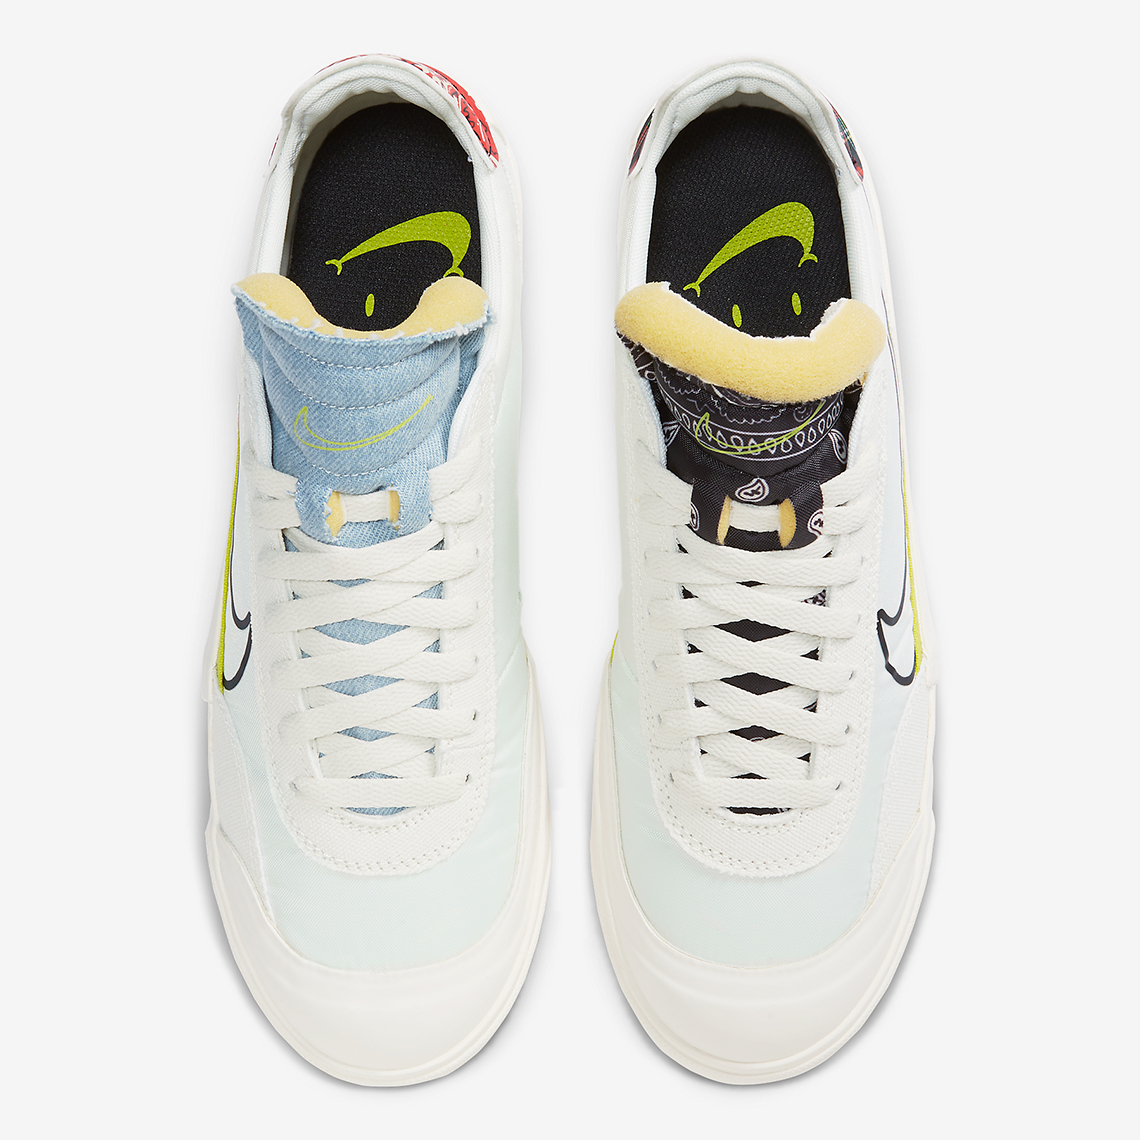 The Nike Drop Type HBR Touched With Various Pattern Swatches Sneaker